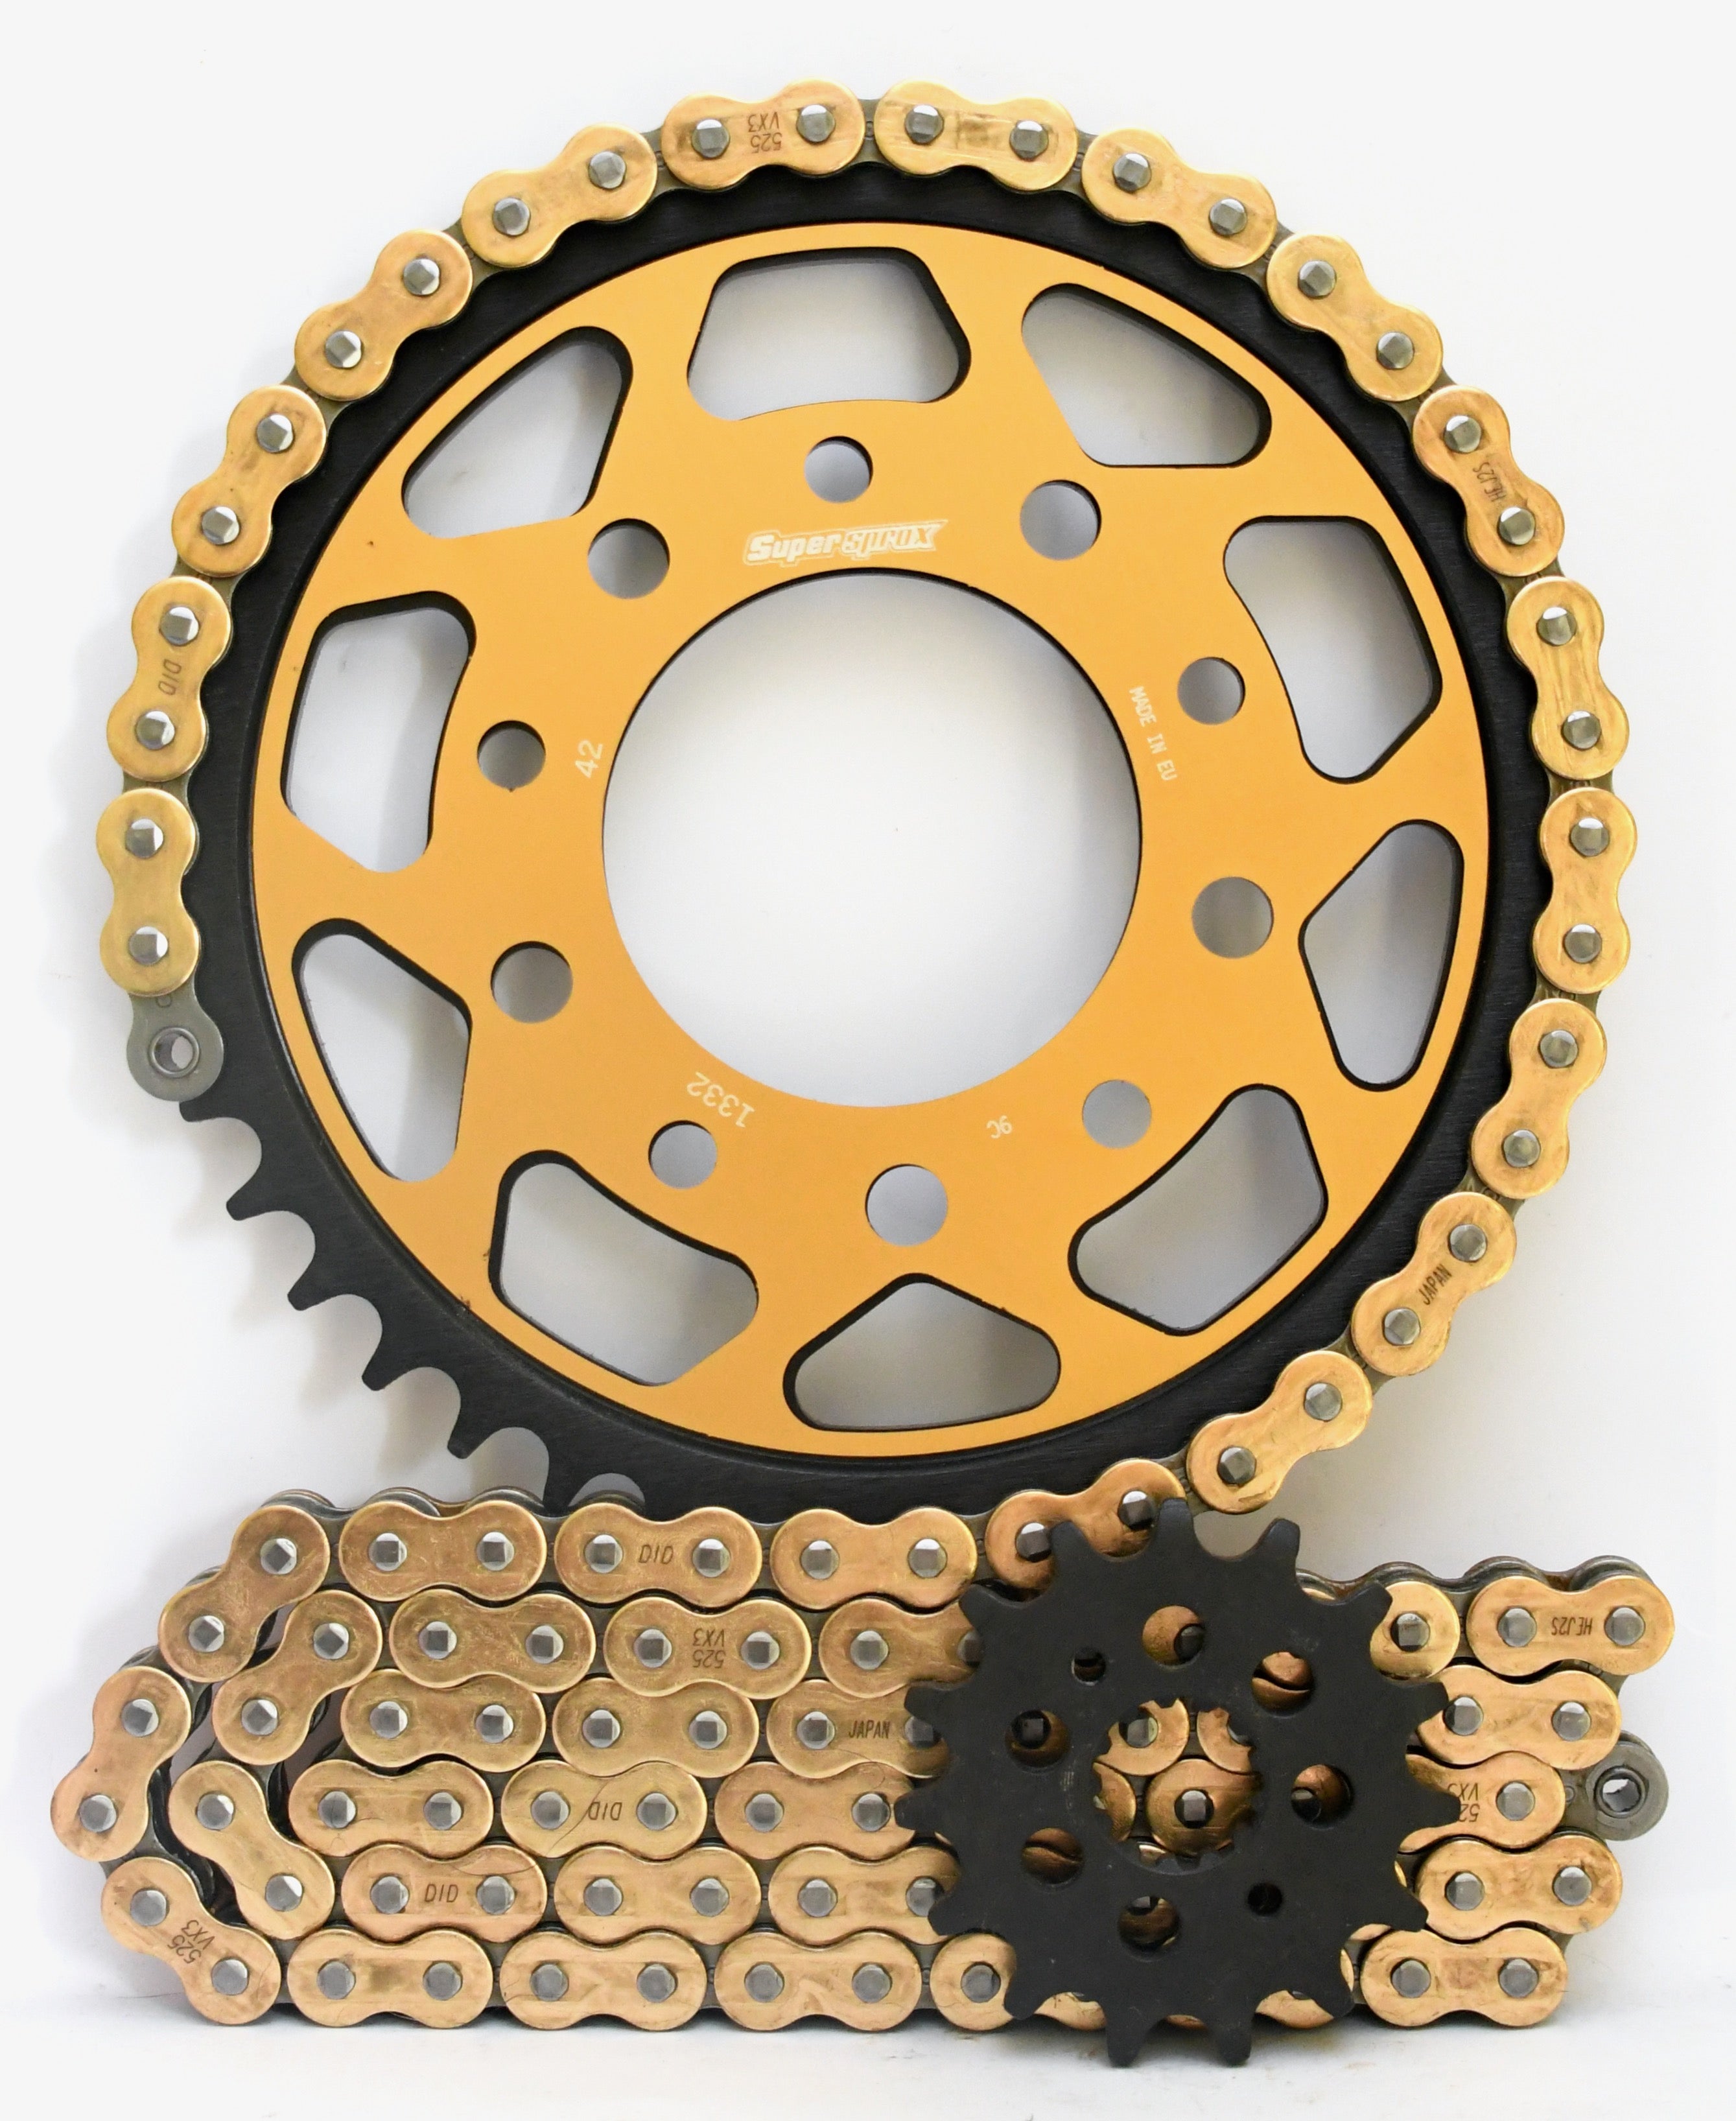 Supersprox Steel Edge Chain & Sprocket Kit for Triumph America 800 2002-2006 - Standard Gearing - 0